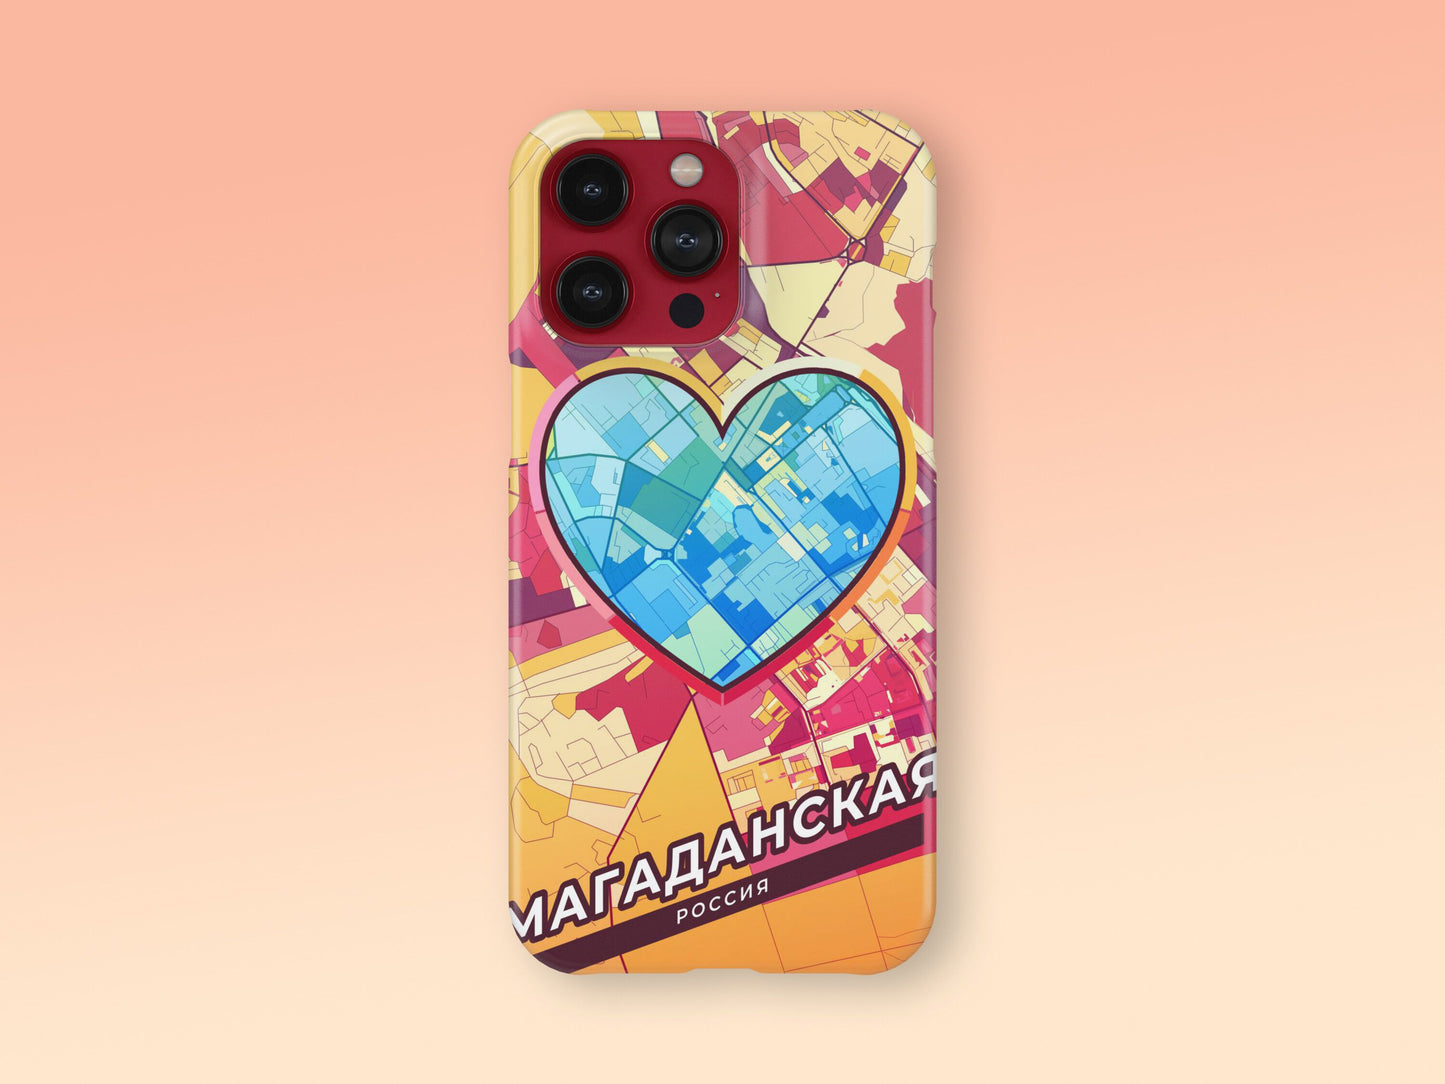 Magadan Russia slim phone case with colorful icon. Birthday, wedding or housewarming gift. Couple match cases. 2